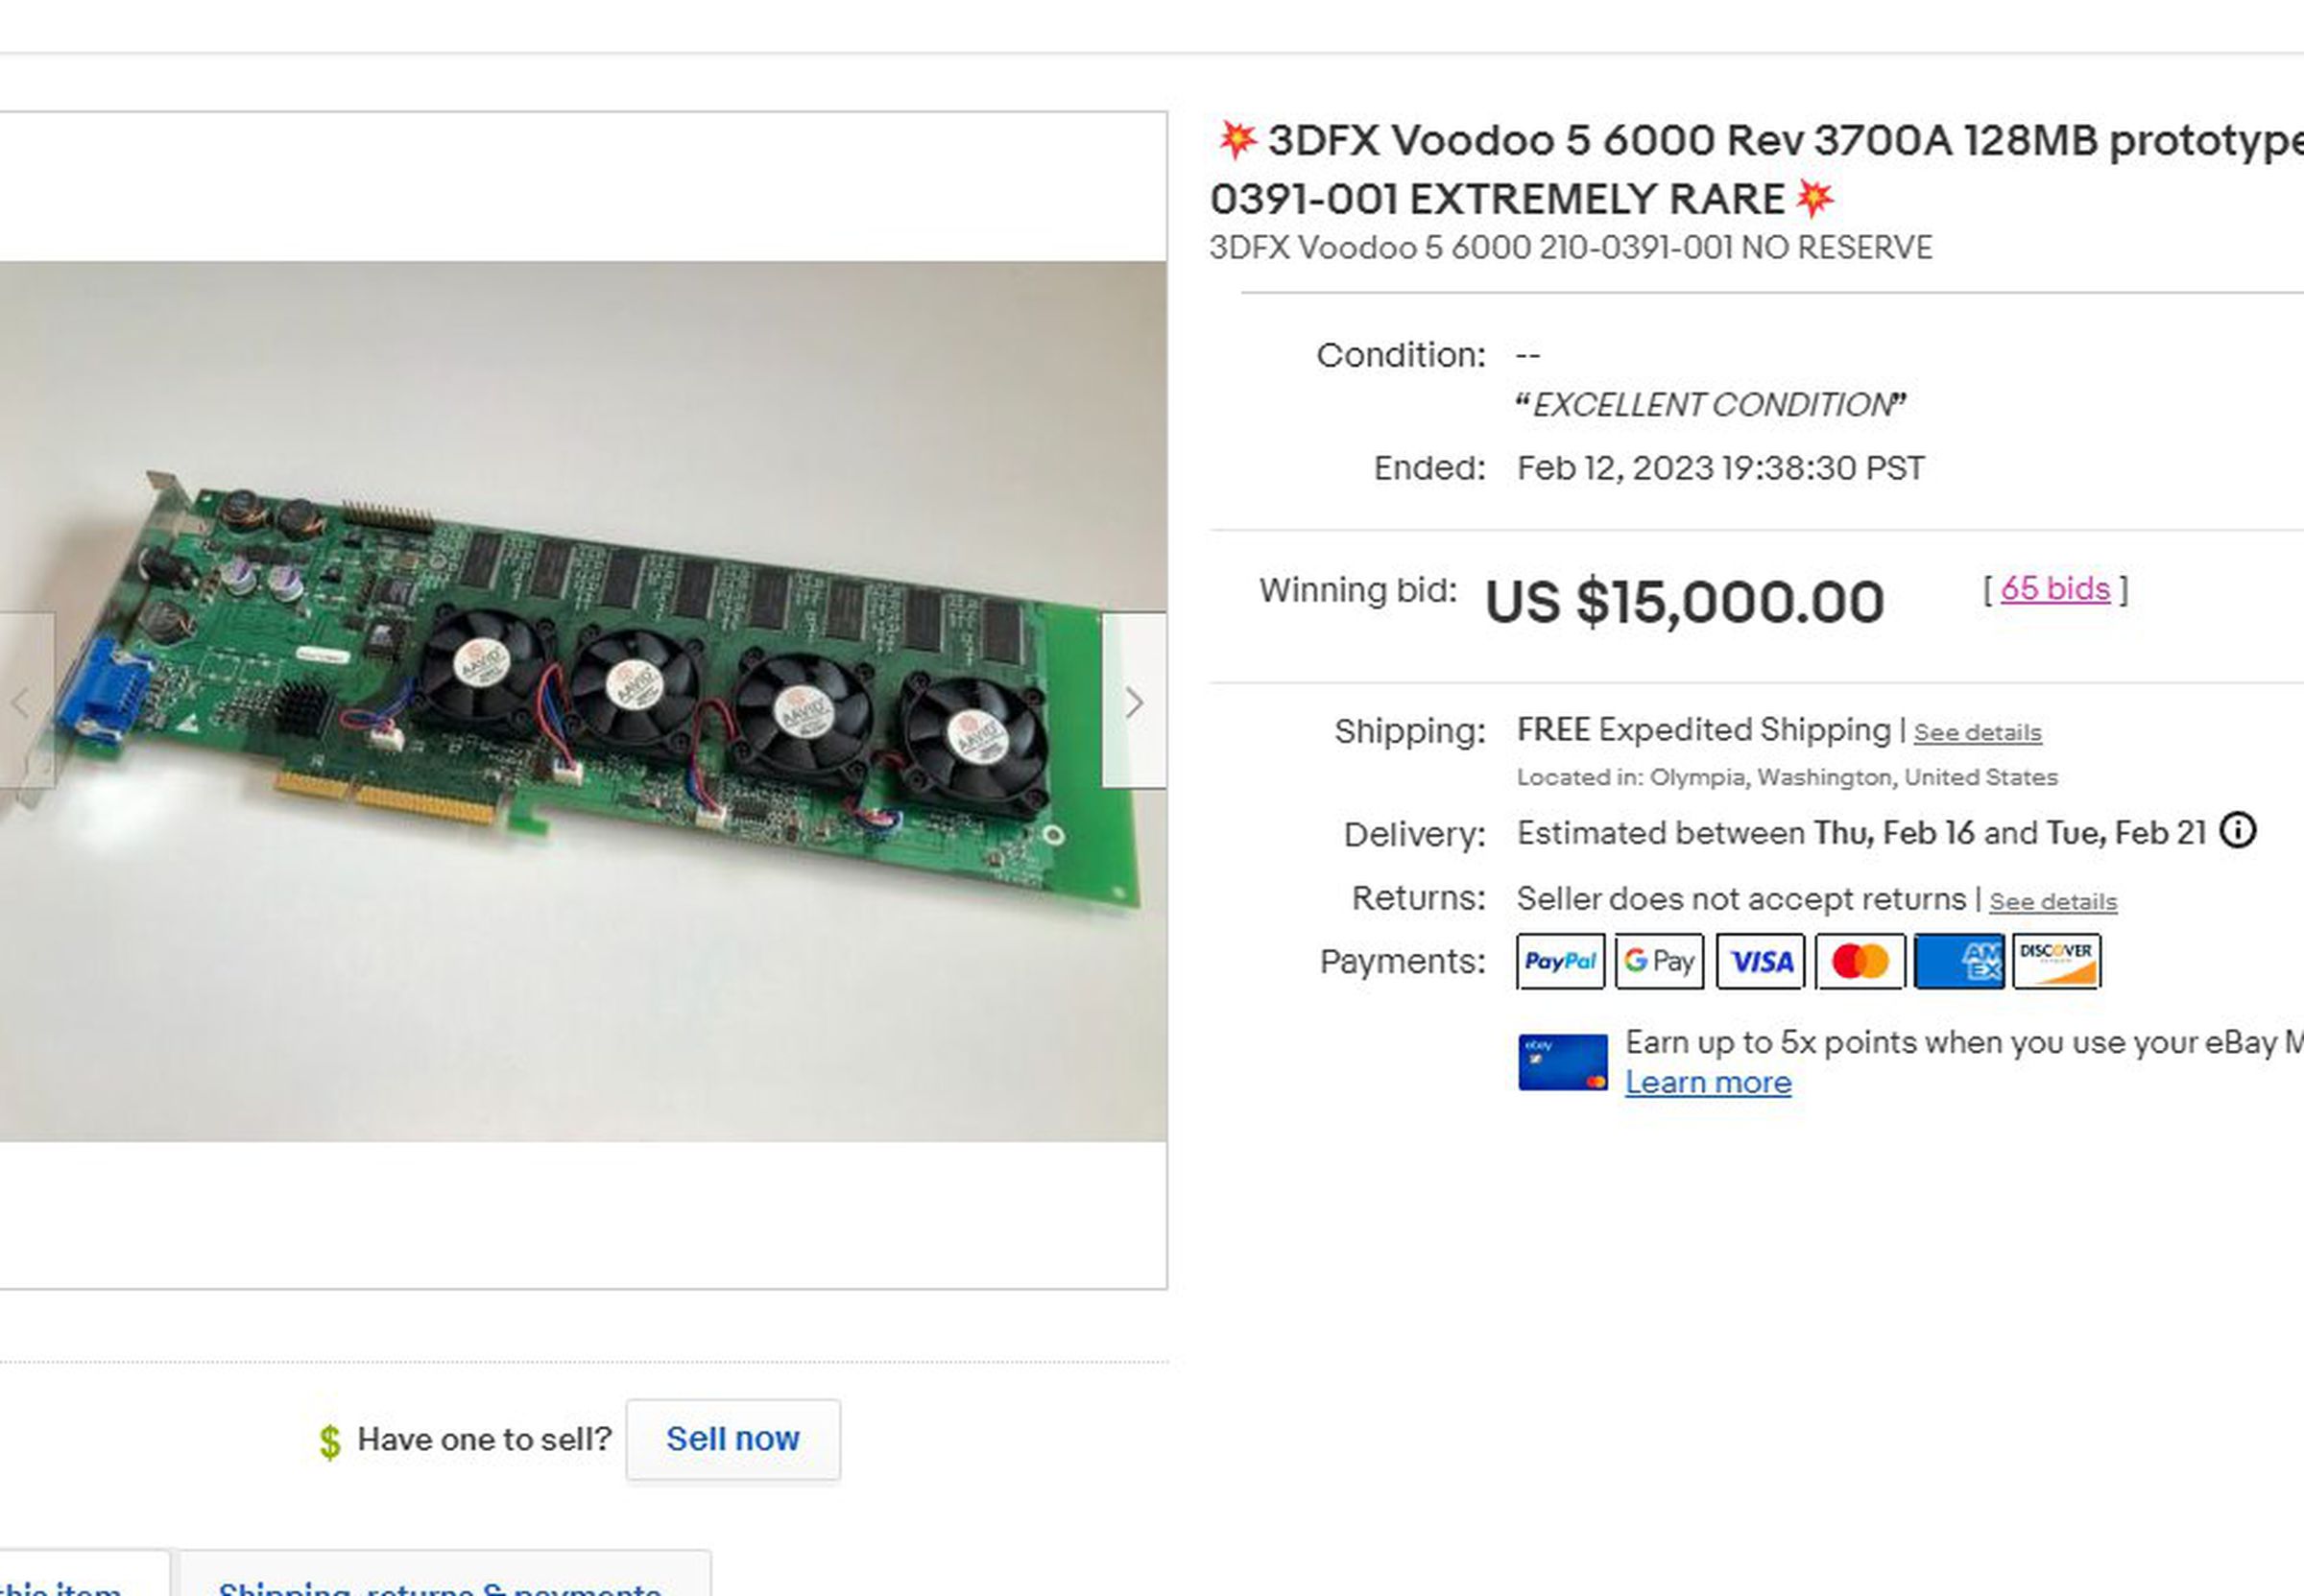 eBay listing for a prototype 3DFX Voodoo 5 6000 graphics card